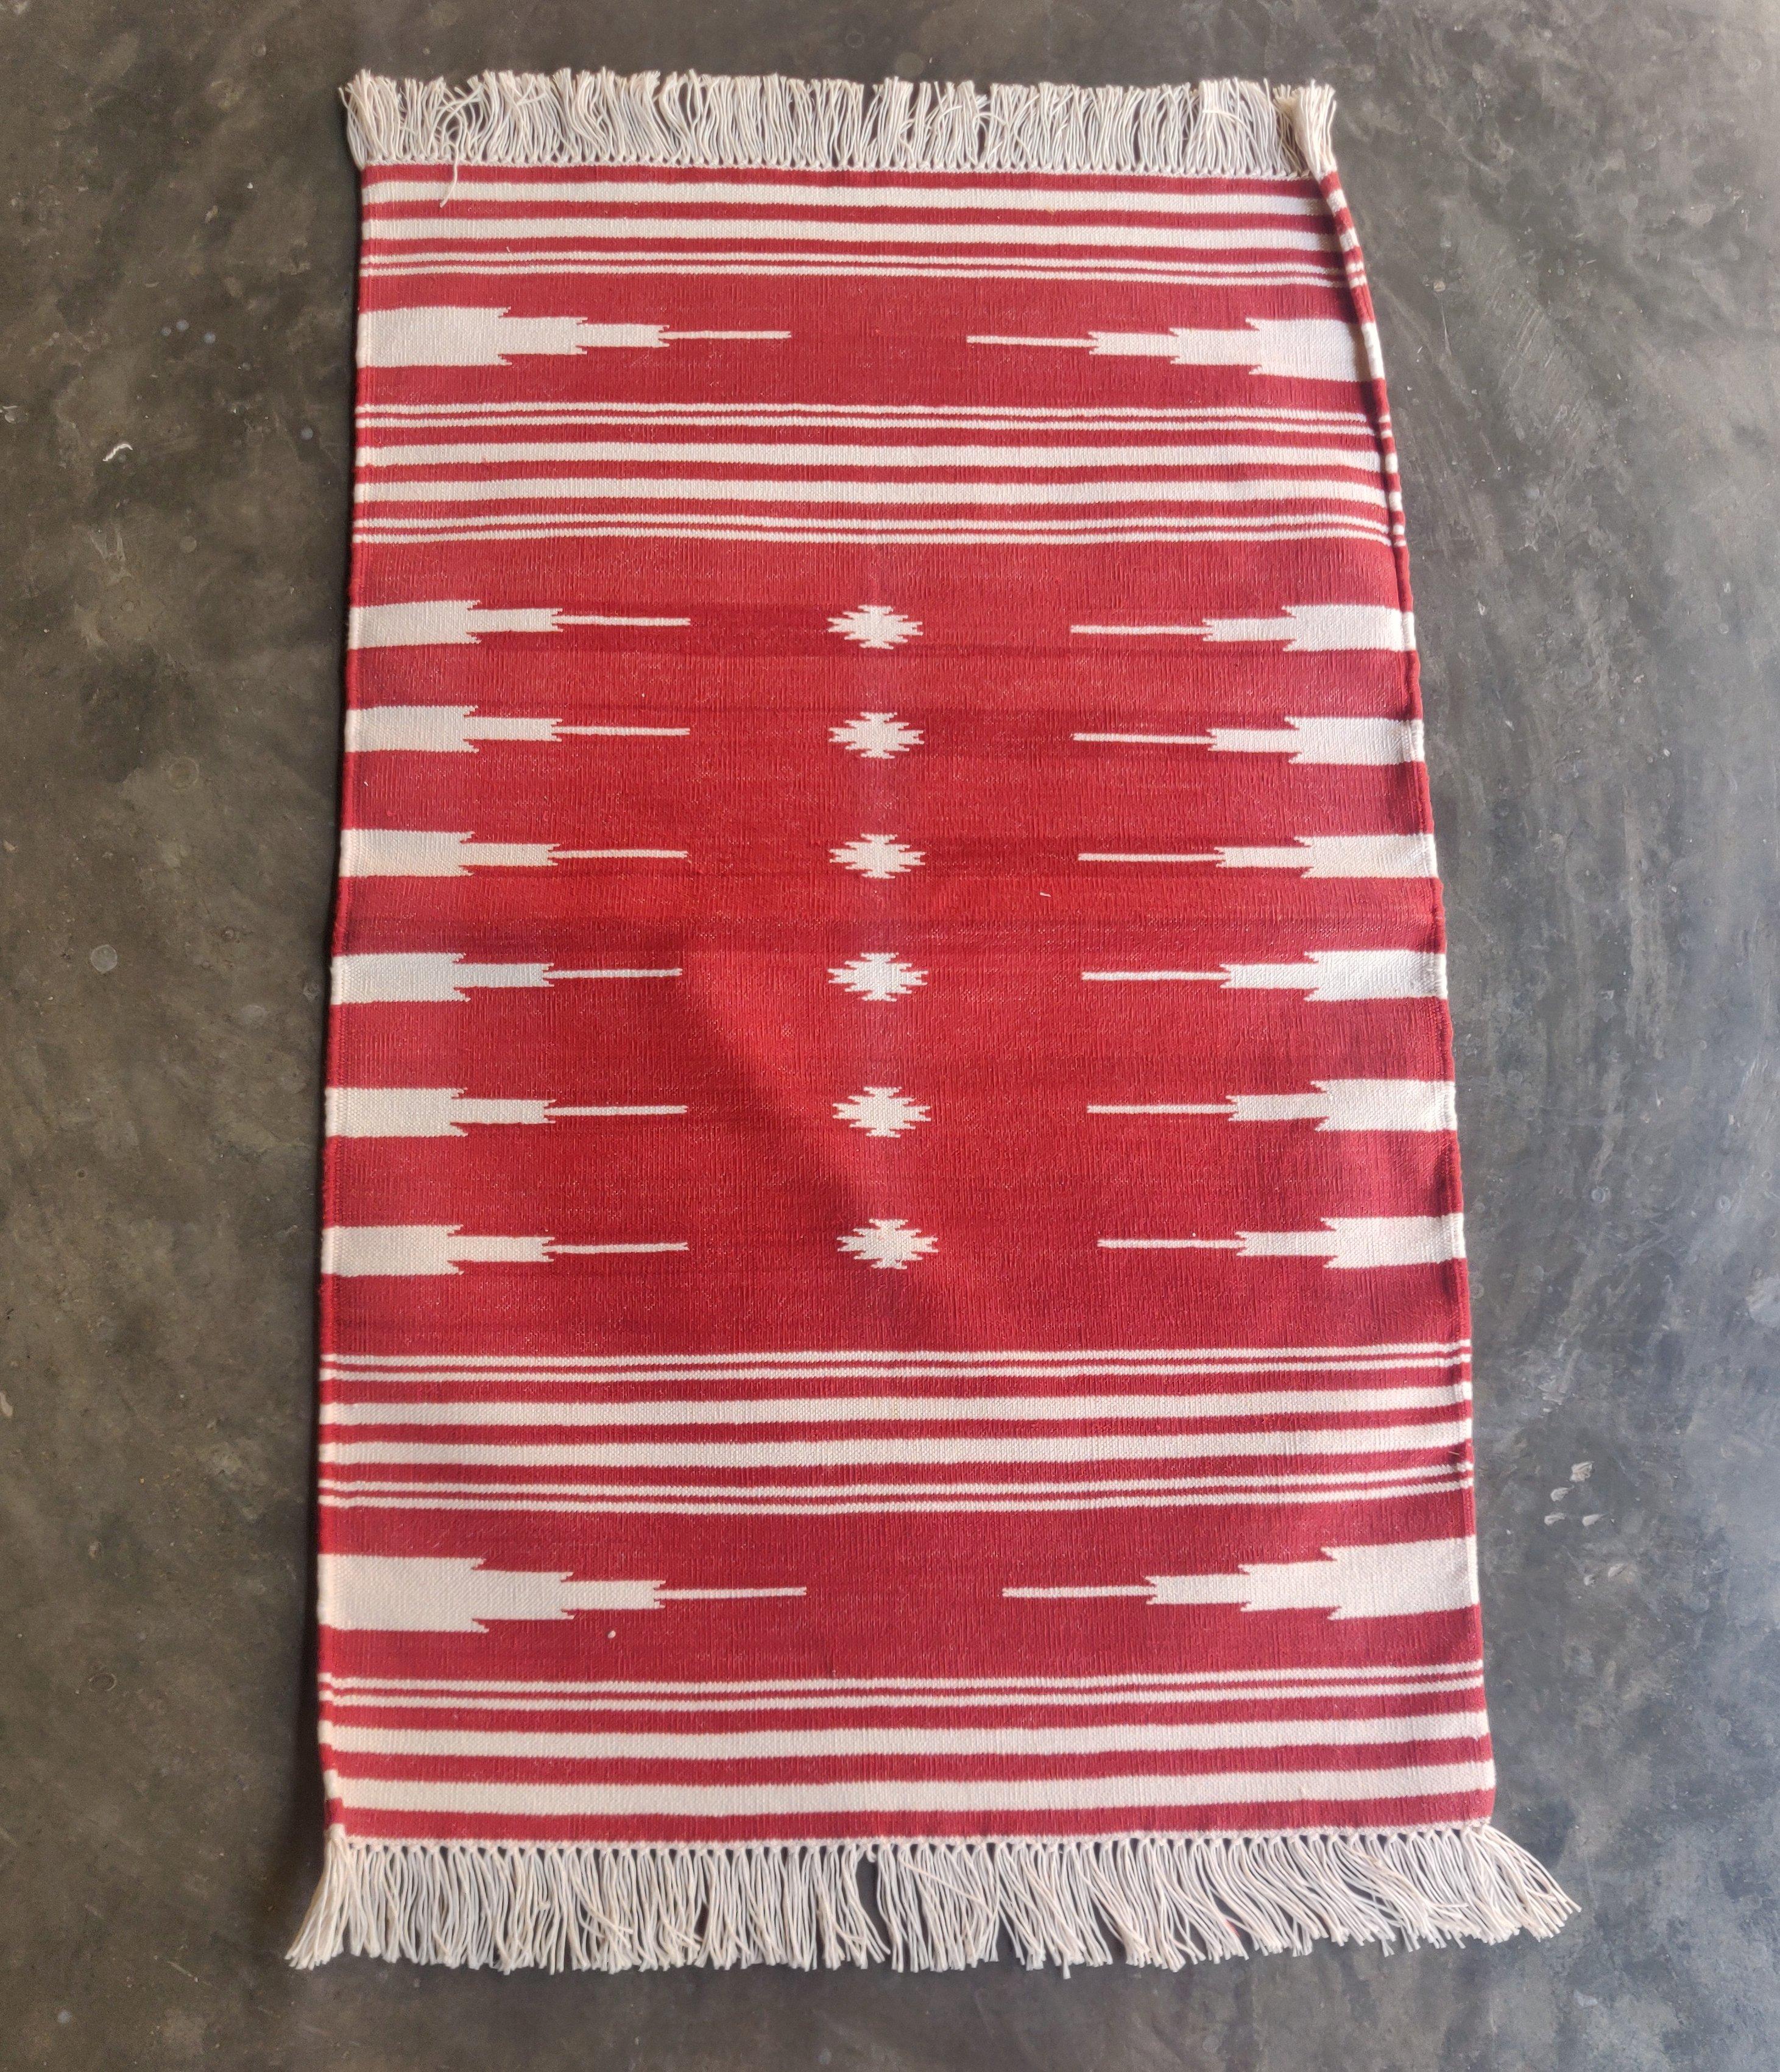 Mid-Century Modern Handmade Cotton Area Flat Weave Rug, 2x3 Red And White Striped Indian Dhurrie For Sale